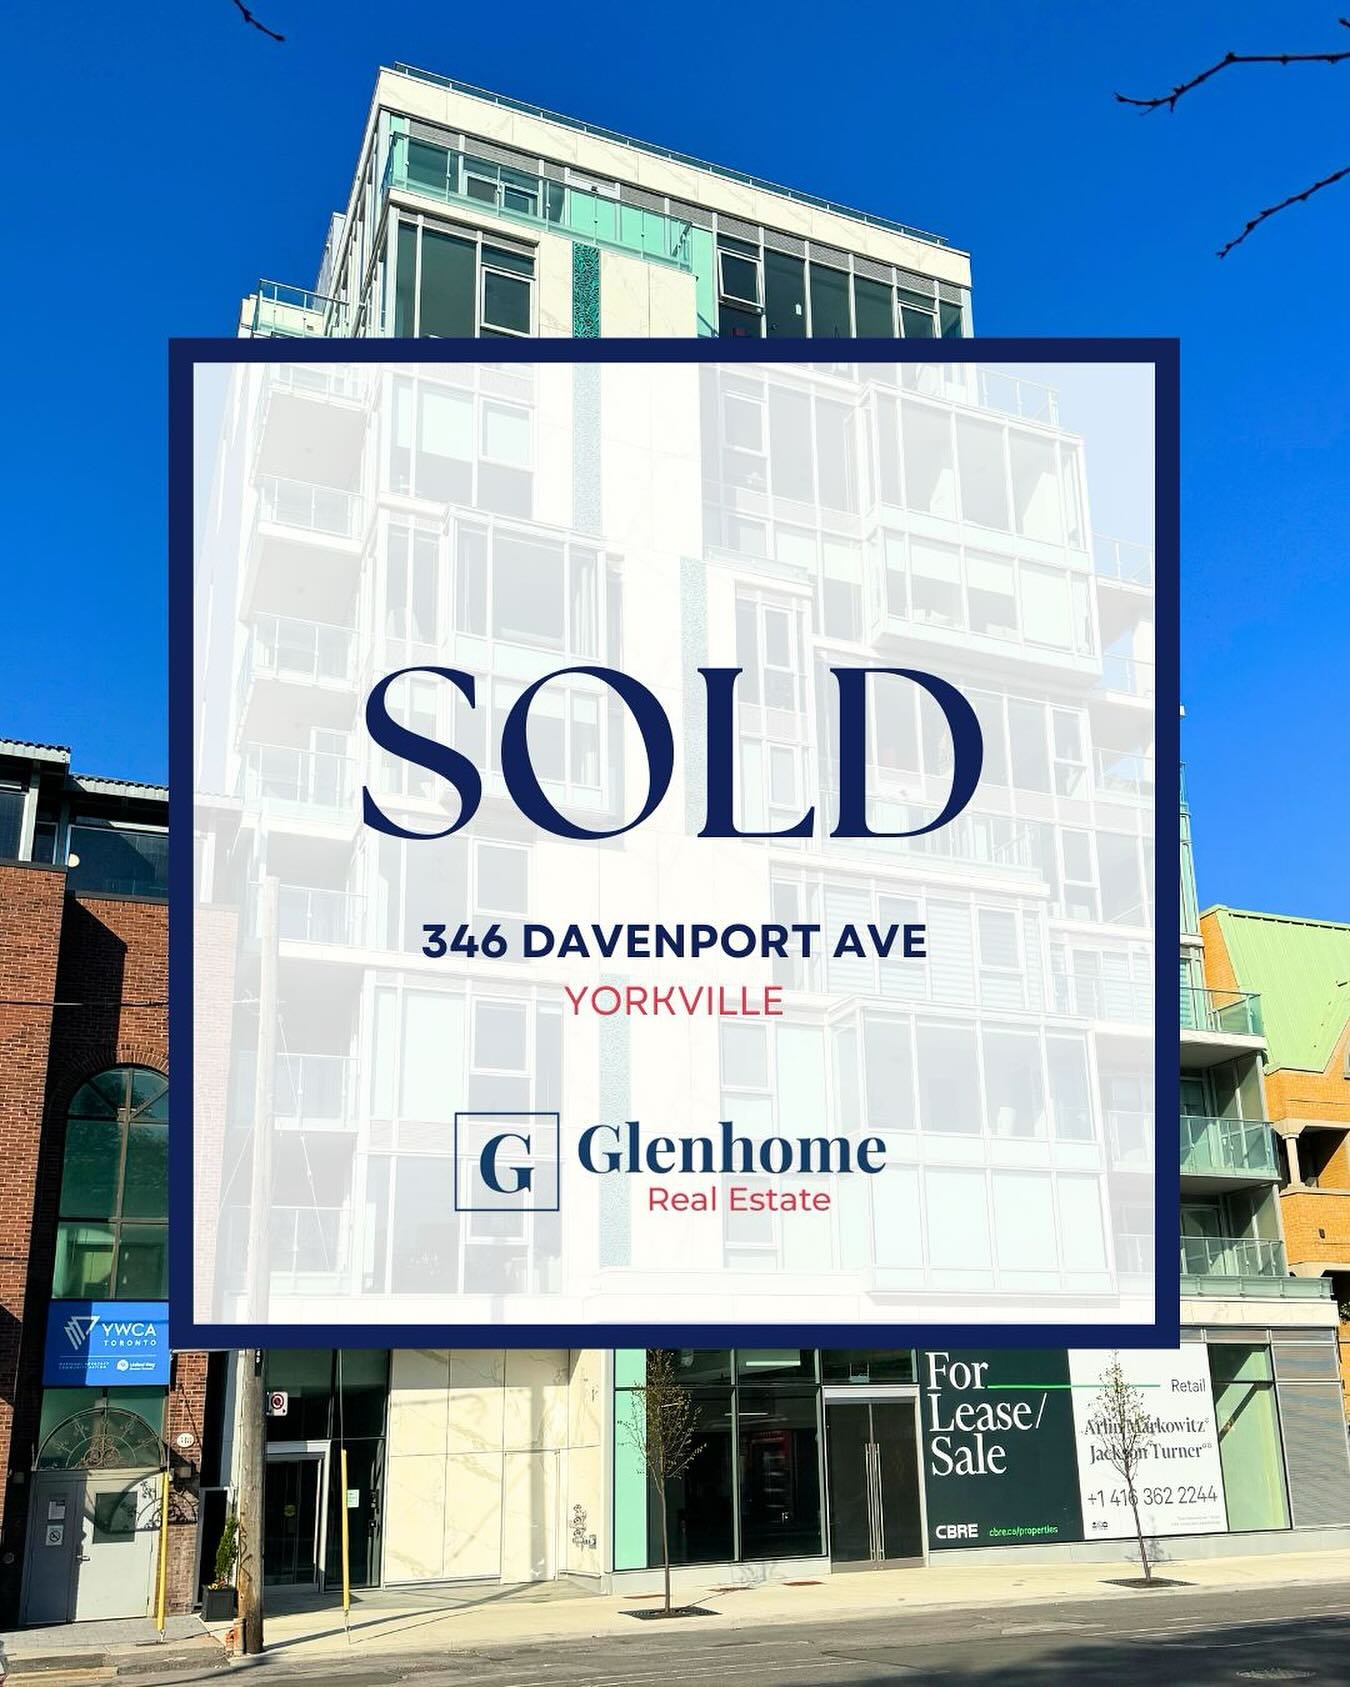 Congratulations to our client on the purchase of an unbelievable suite at 346 Davenport Ave! 🍾 

346 Davenport Ave | Suite 701
MLS: C8240386

Sold by:

Joseph Robert
Broker of Record
Royal LePage Terrequity
Glenhome Real Estate, Brokerage
Joe@glenho